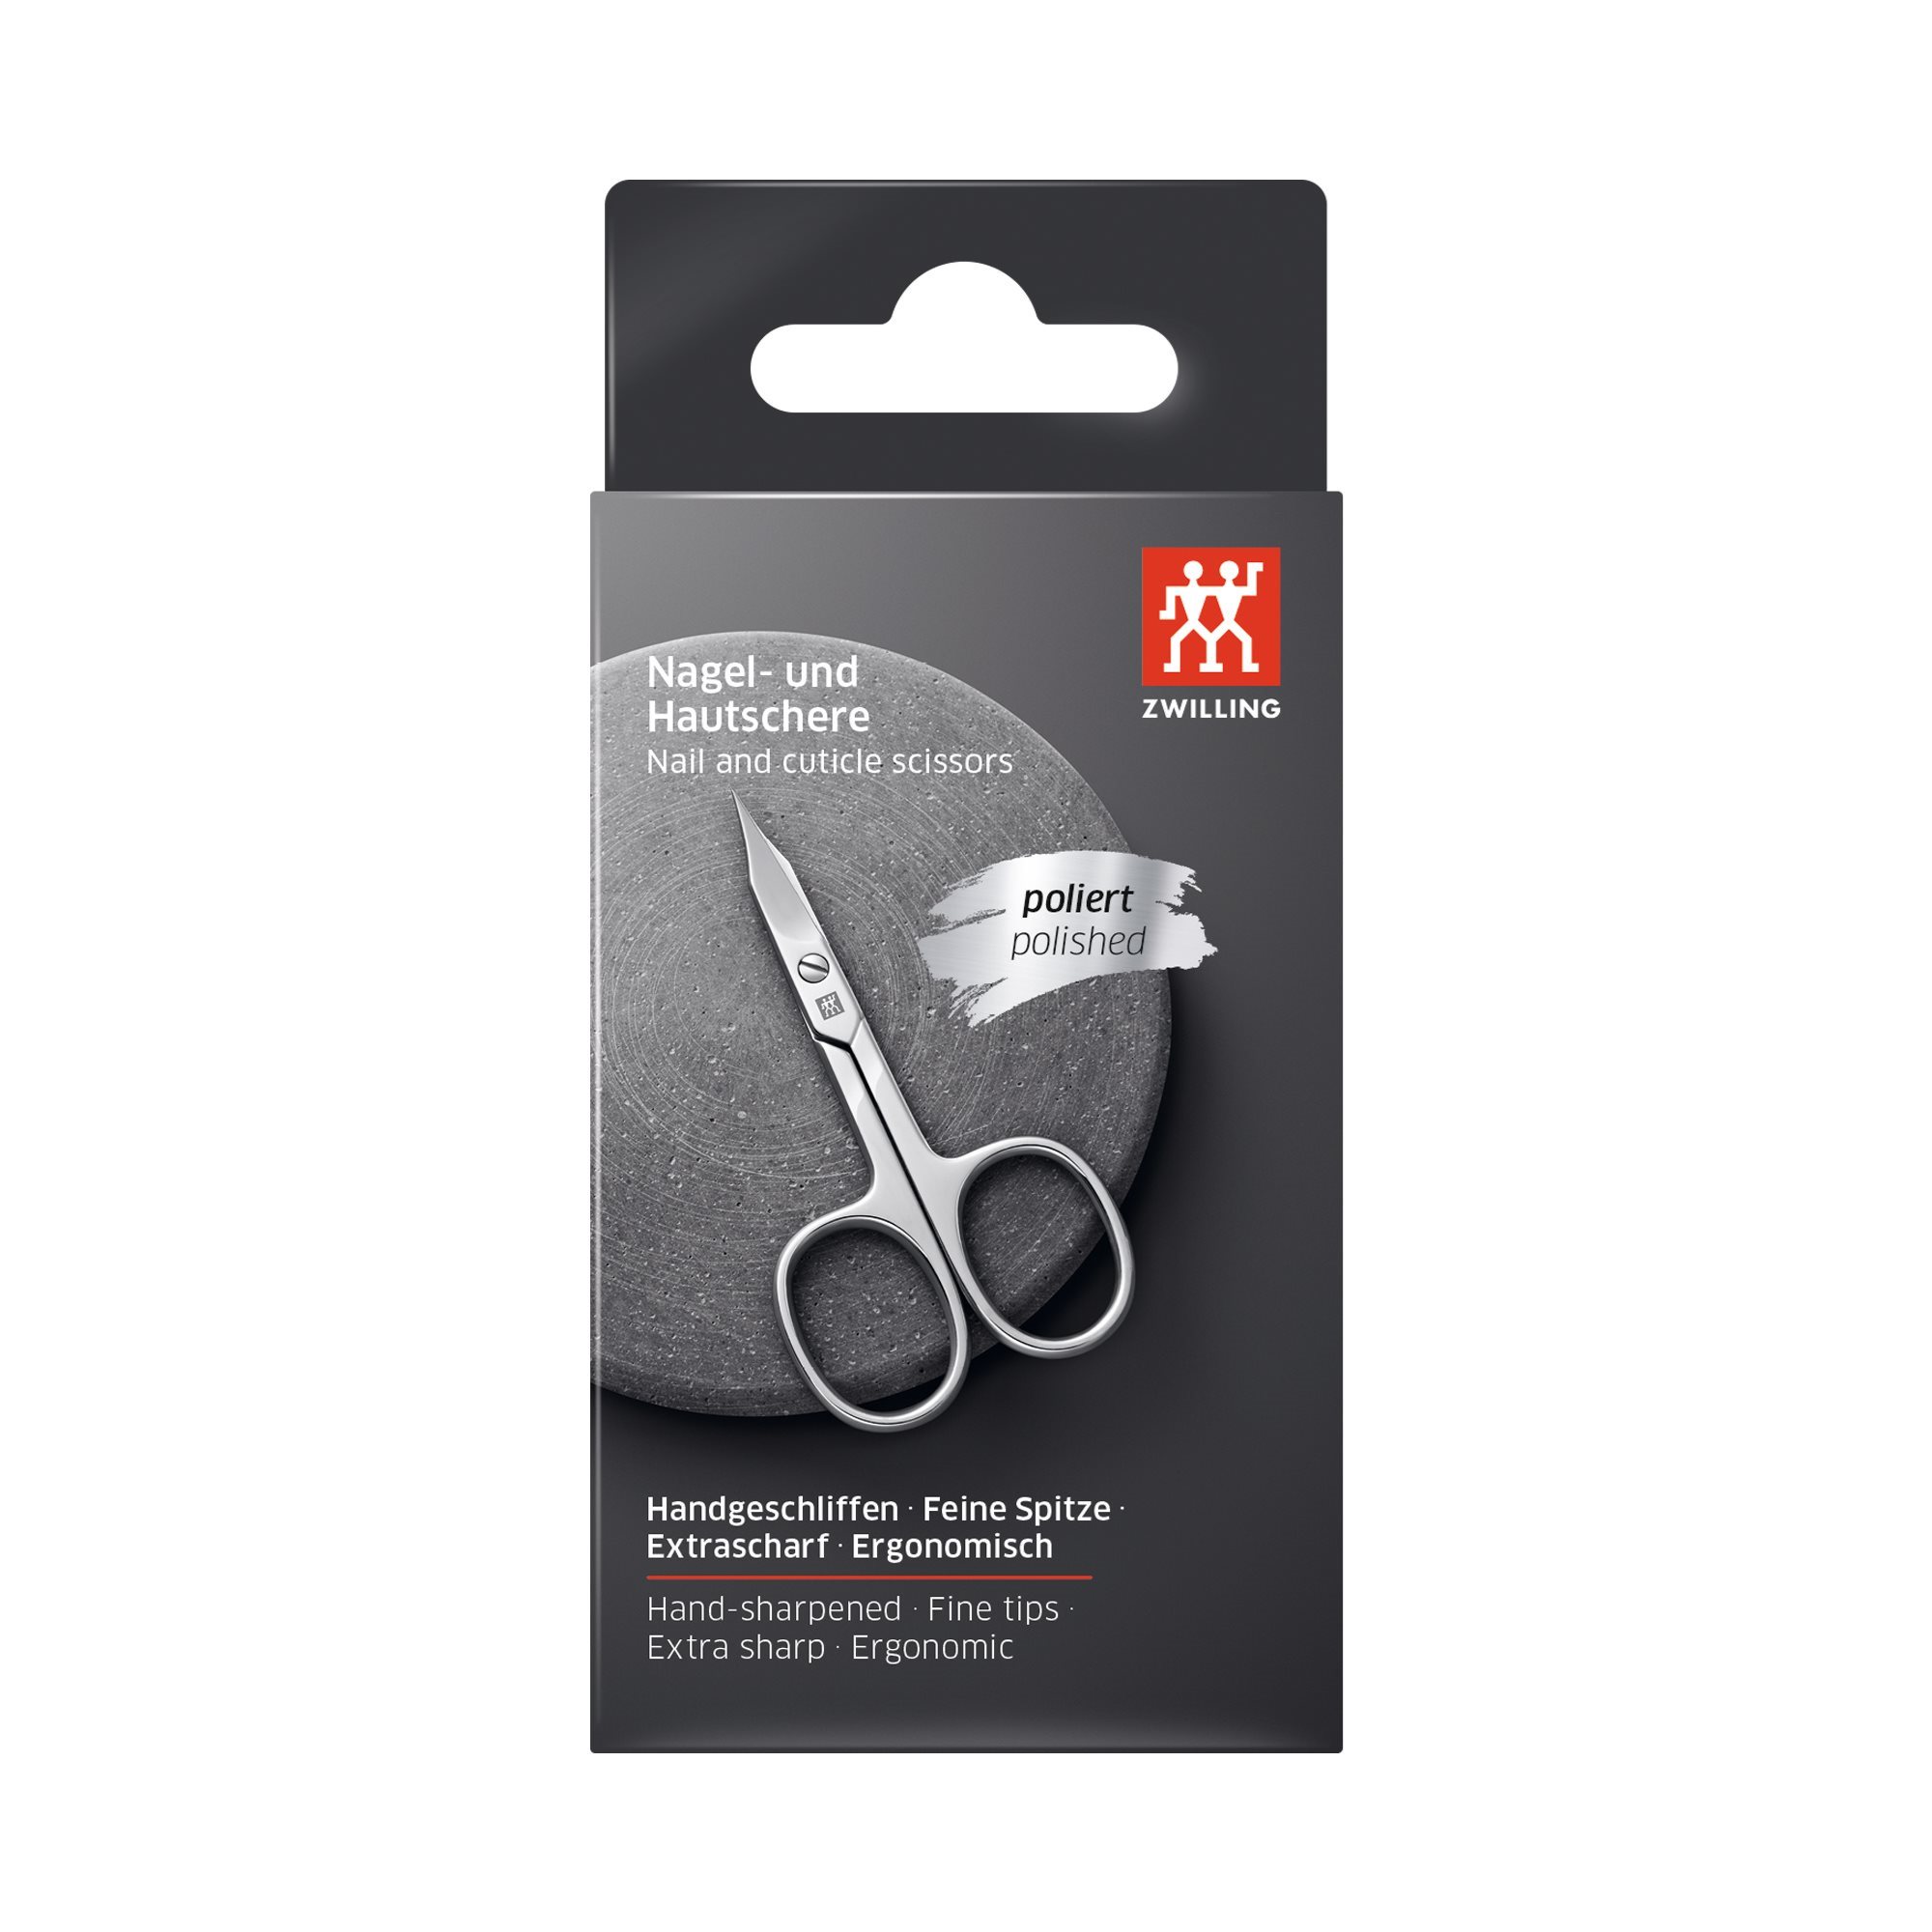 Nail and cuticle scissor, TWIN Classic - Zwilling | KitchenShop